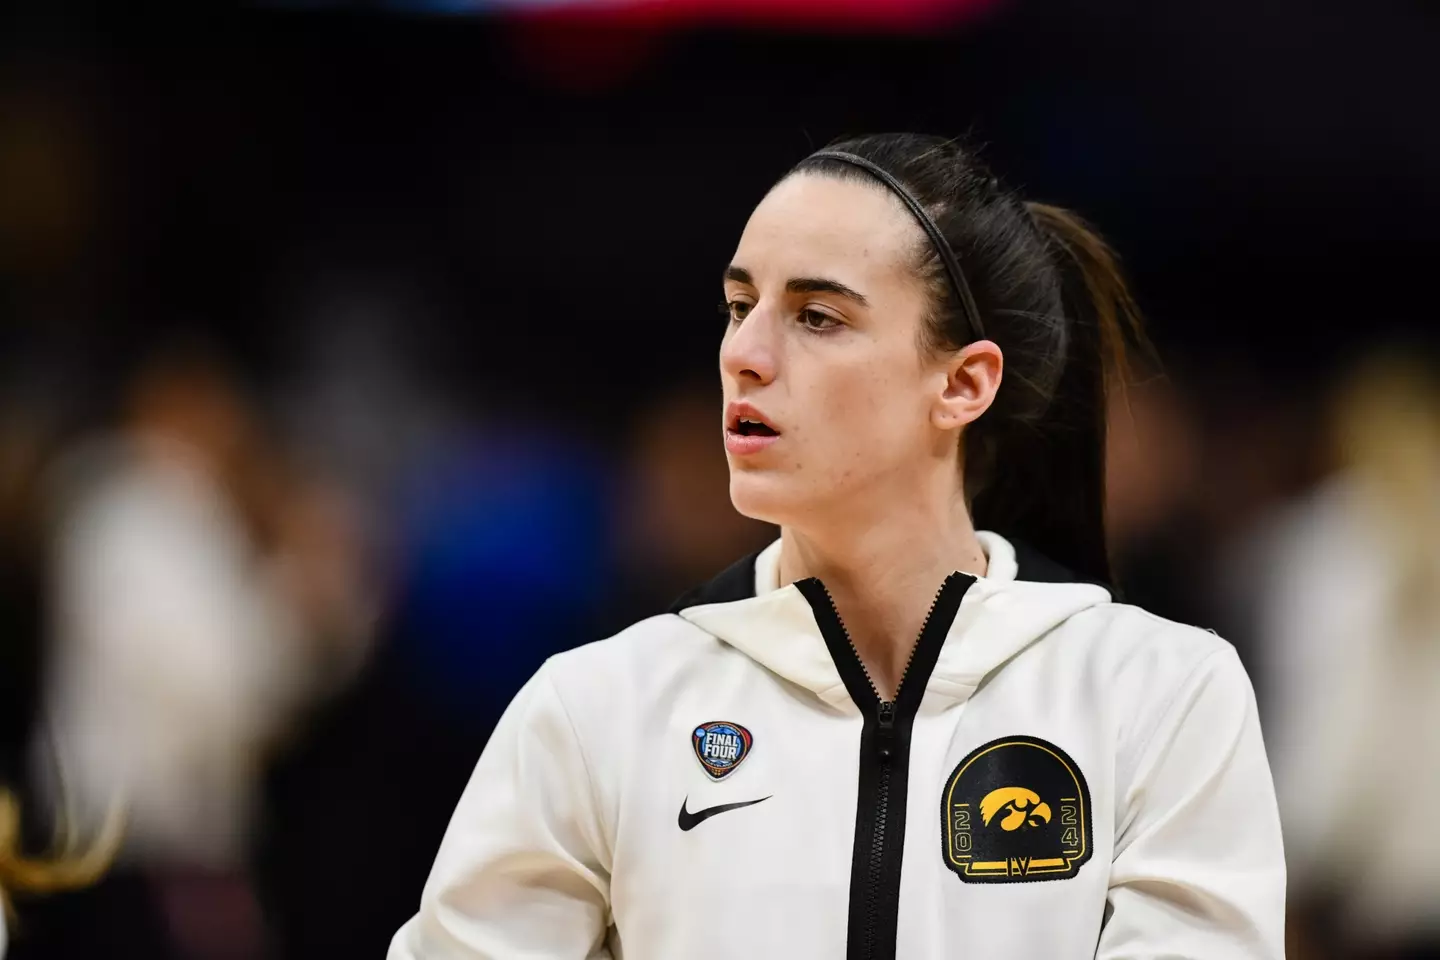 Caitlin Clark plays for the Iowa Hawkeyes. (Thien-An Truong/ISI Photos/Getty Images)